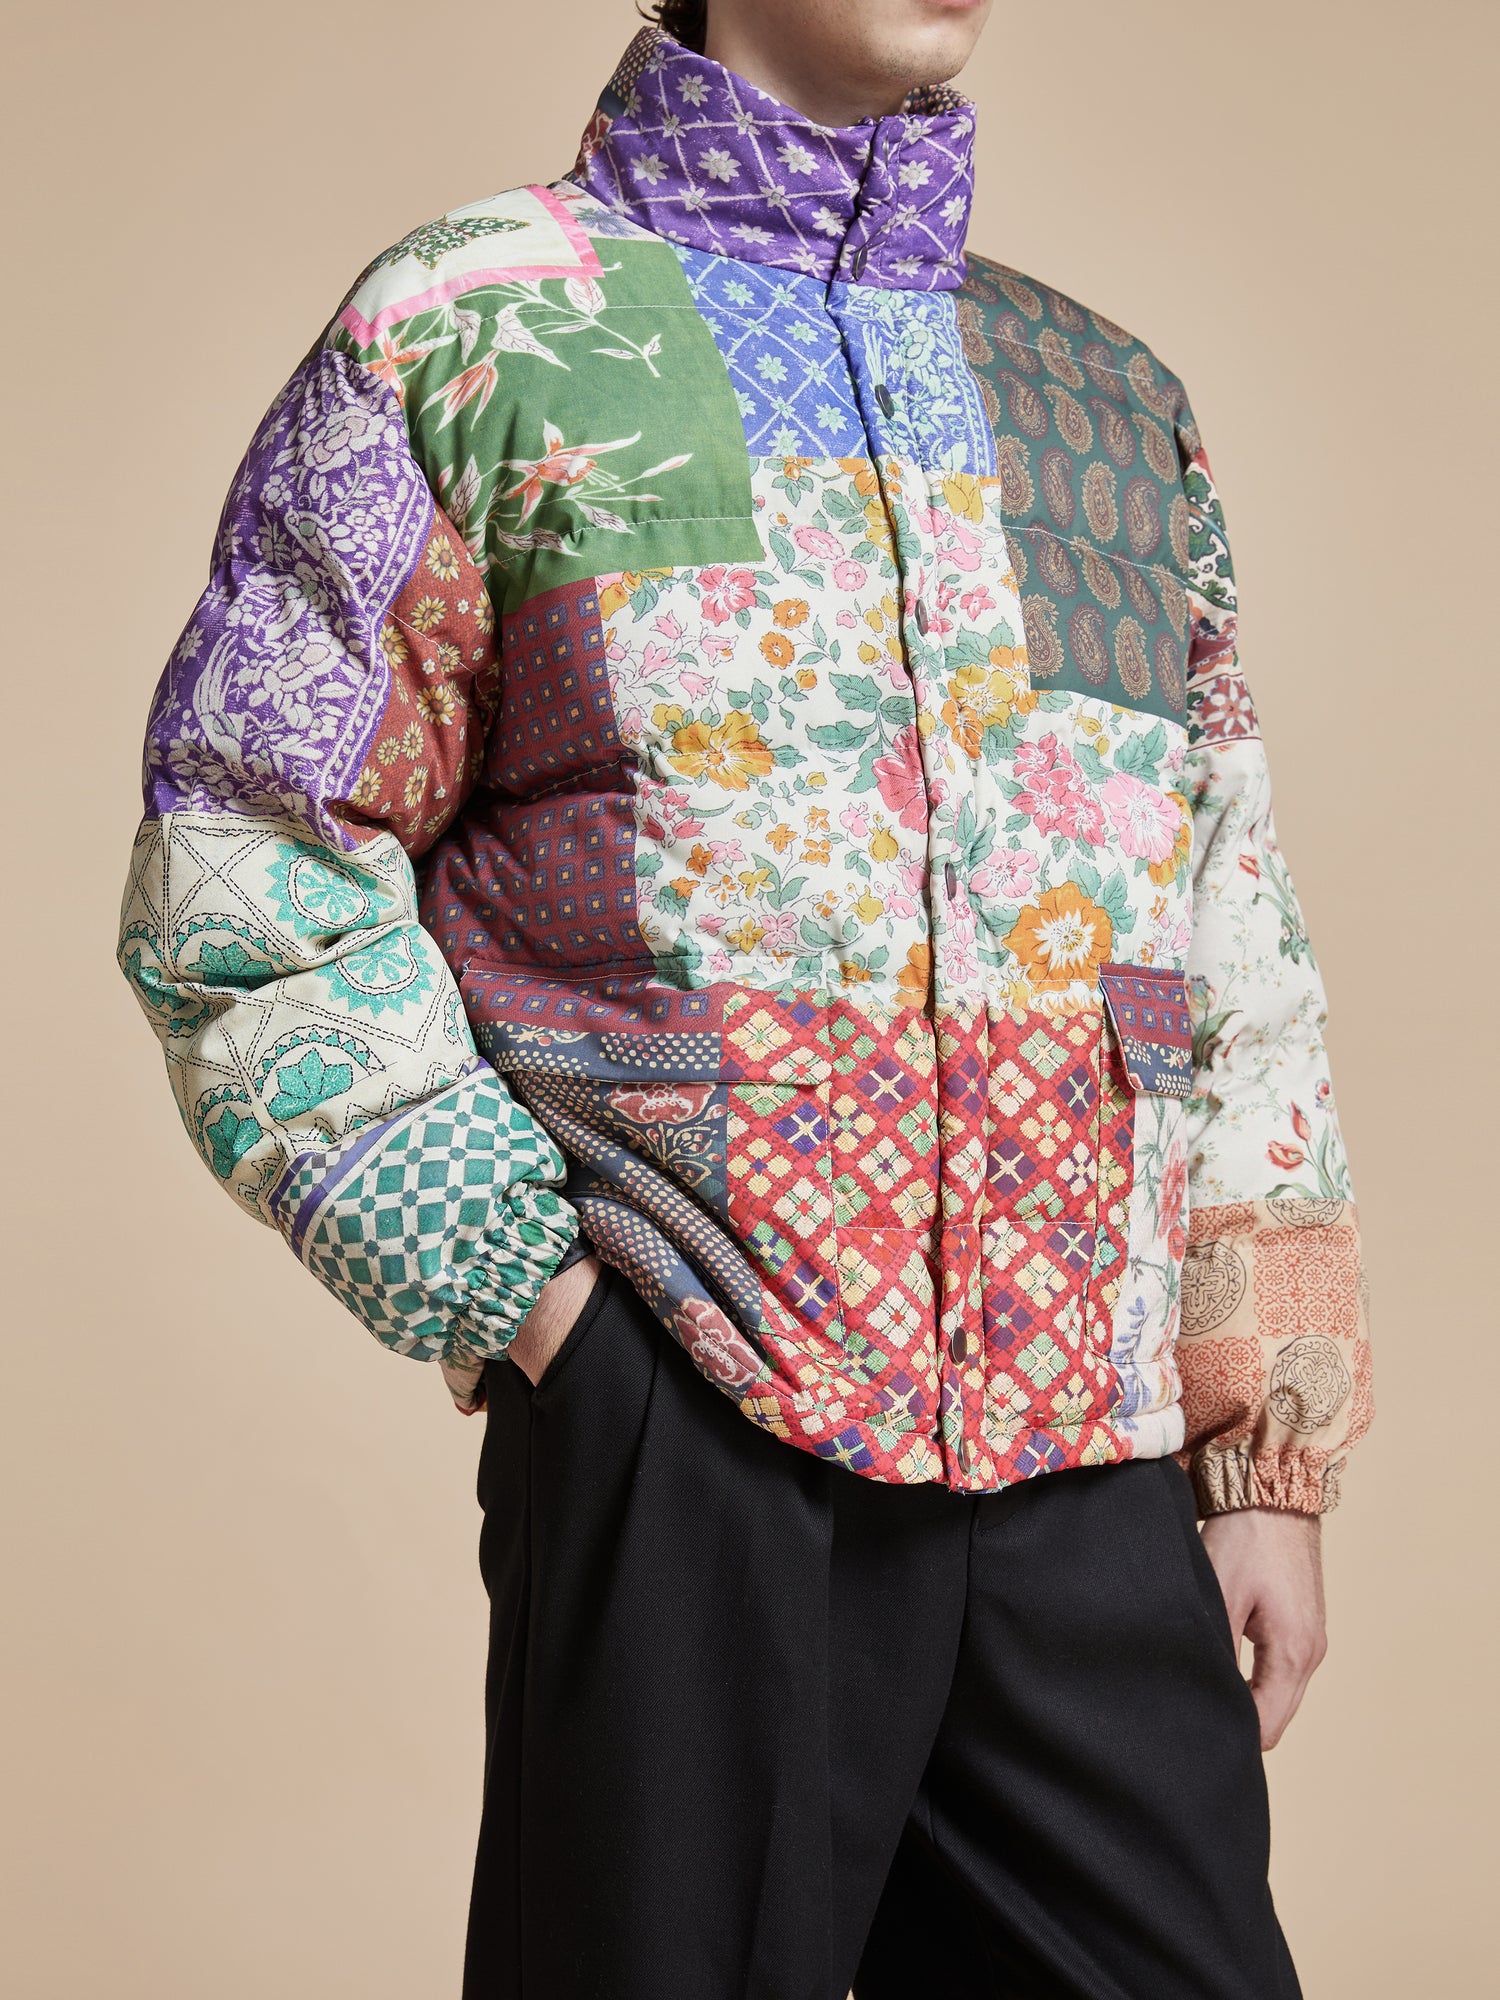 A man wearing a Gardenia Tapestry Puffer Jacket by Found, colorful traditional South Asian prints.